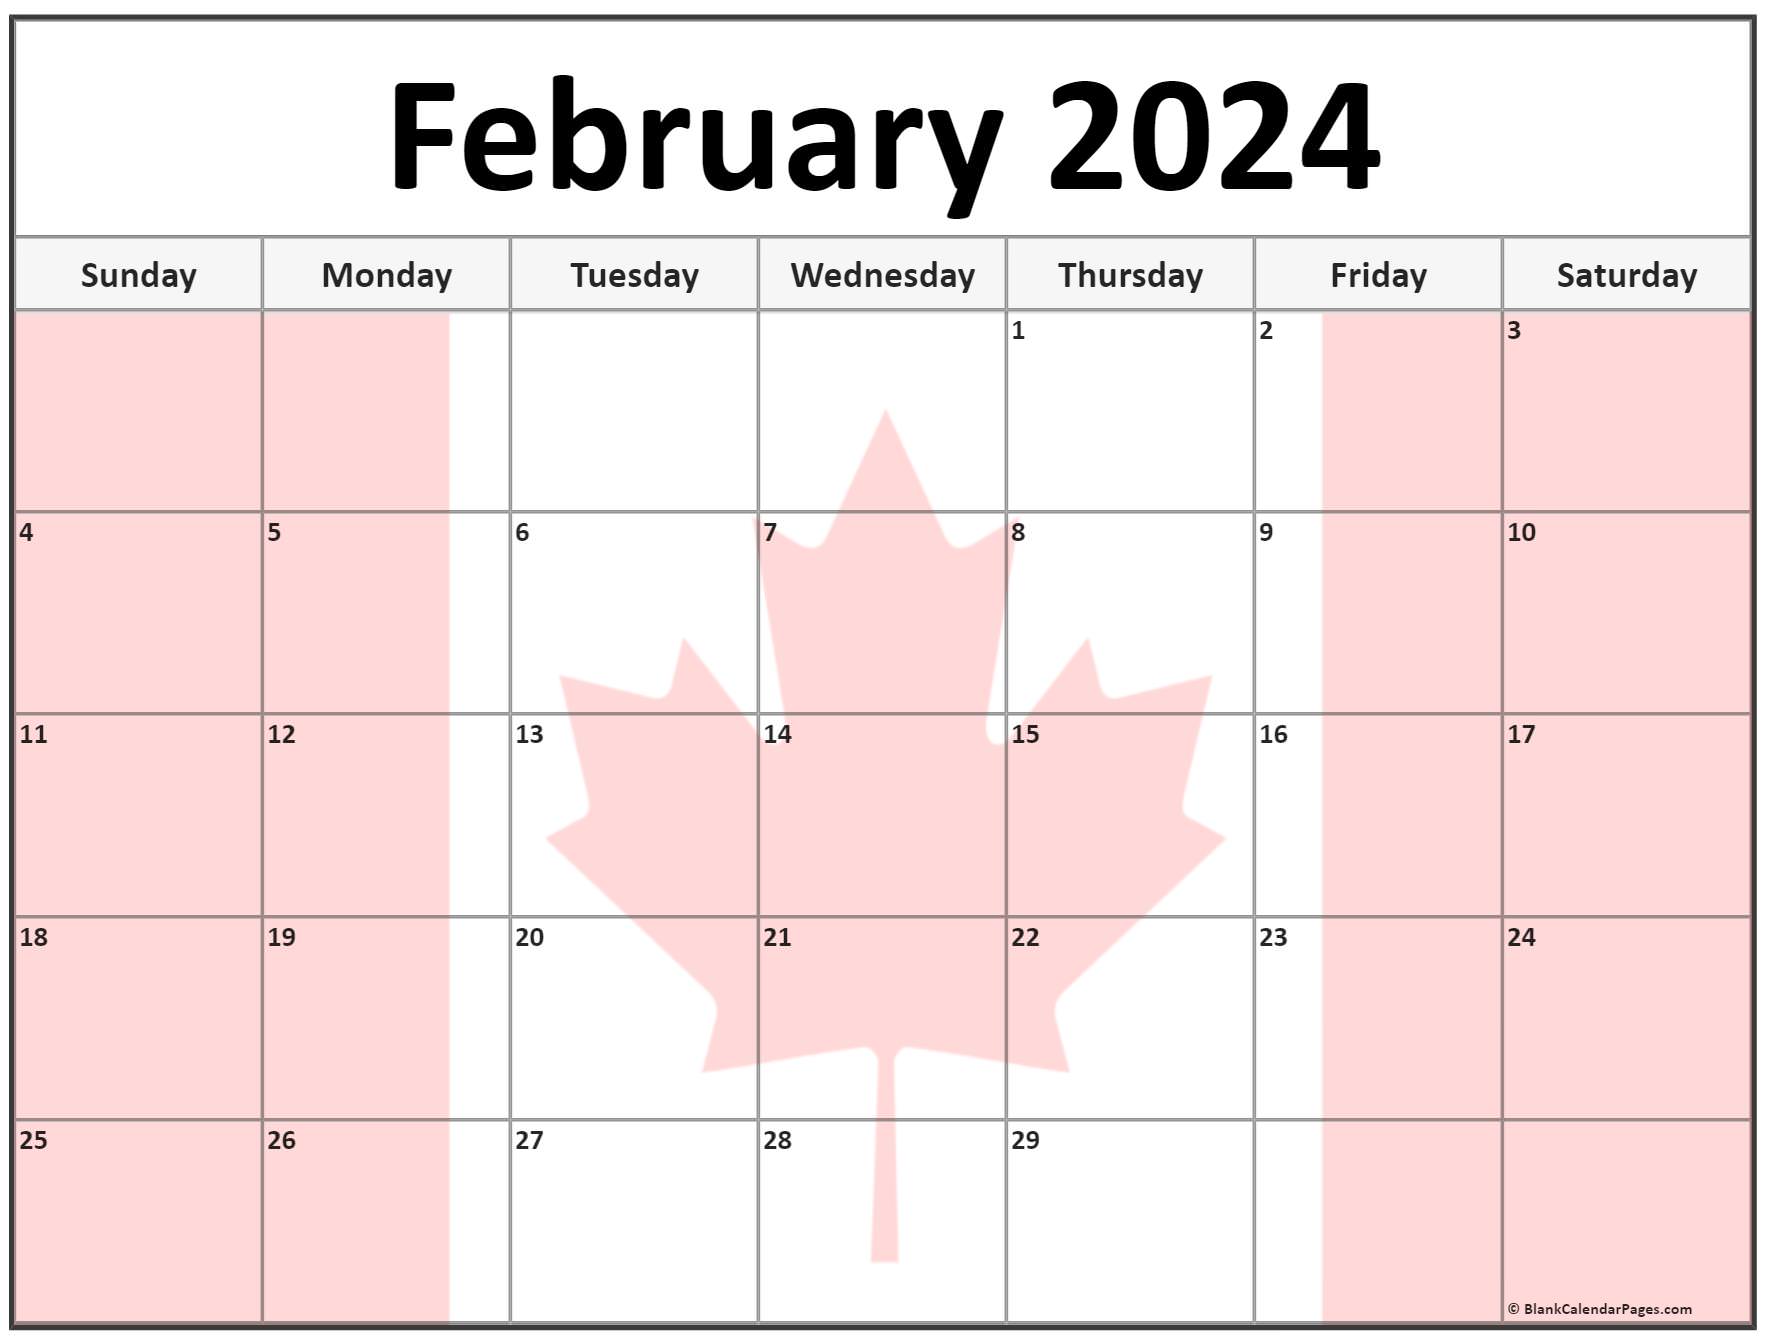 Collection of February 2024 photo calendars with image filters